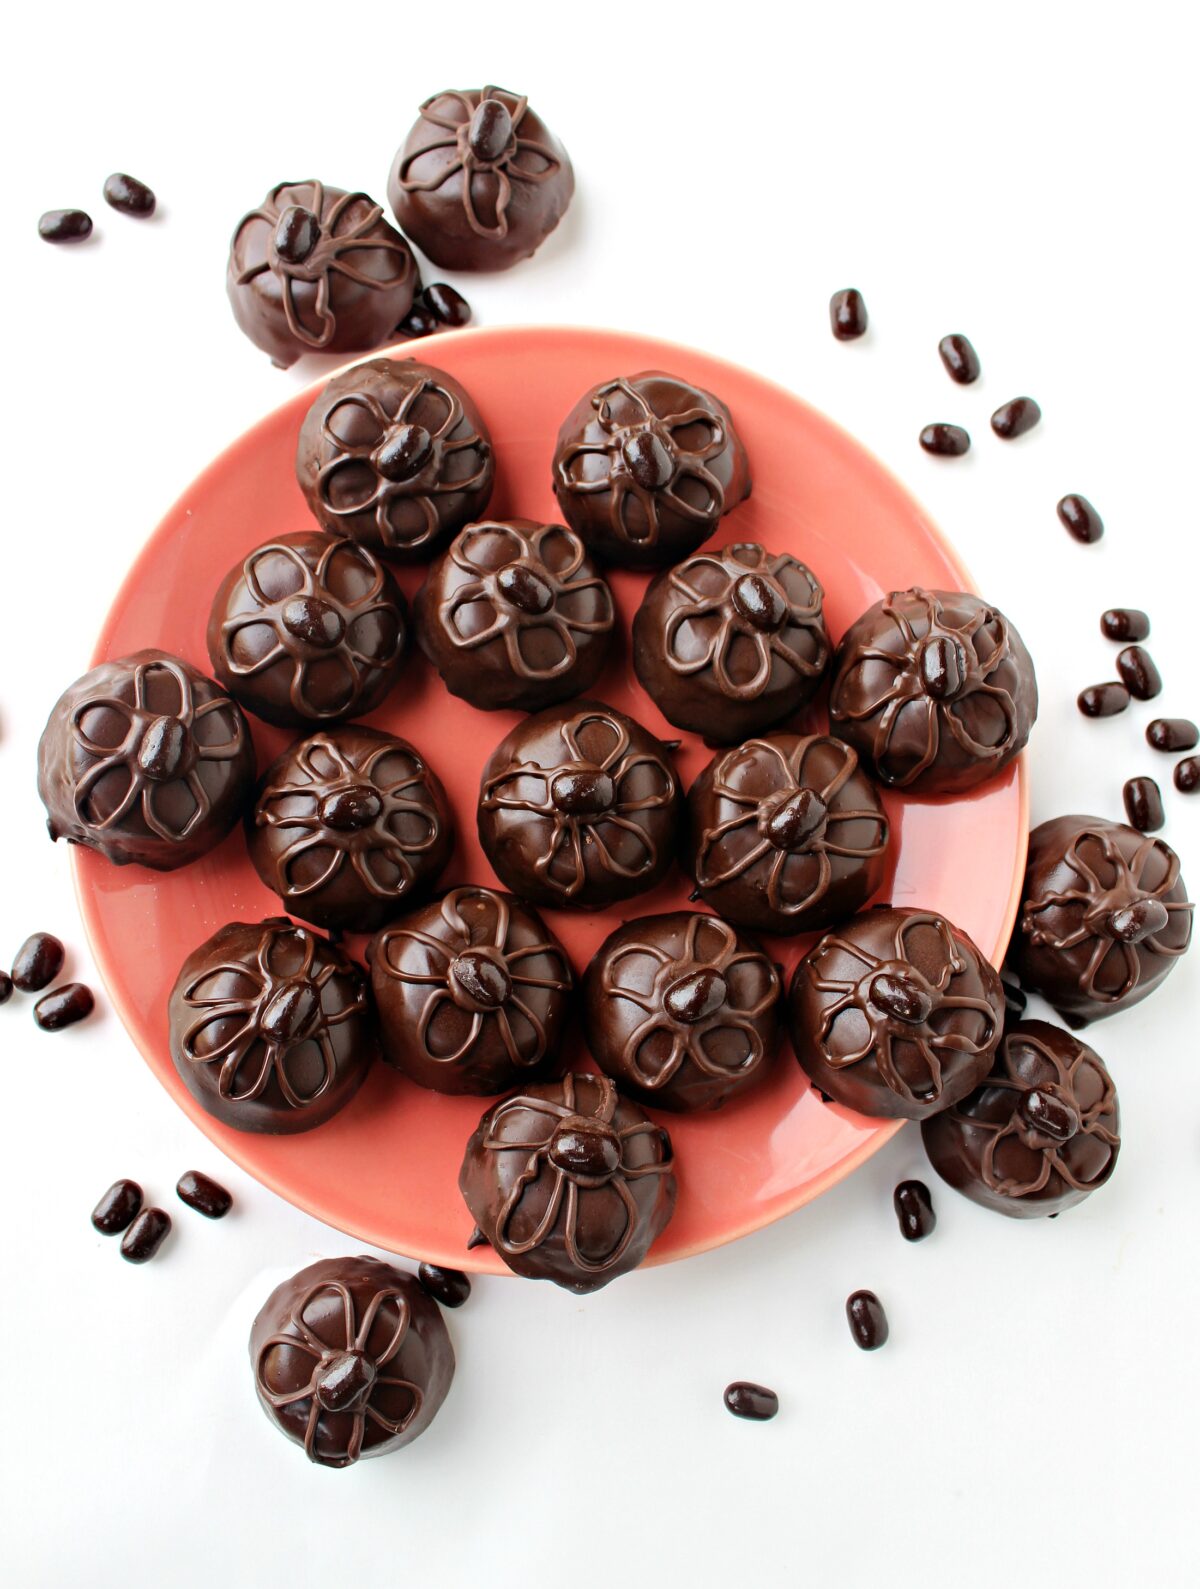 Bite sized Brownie Bites coated in chocolate with a chocolate piped flower design on top.